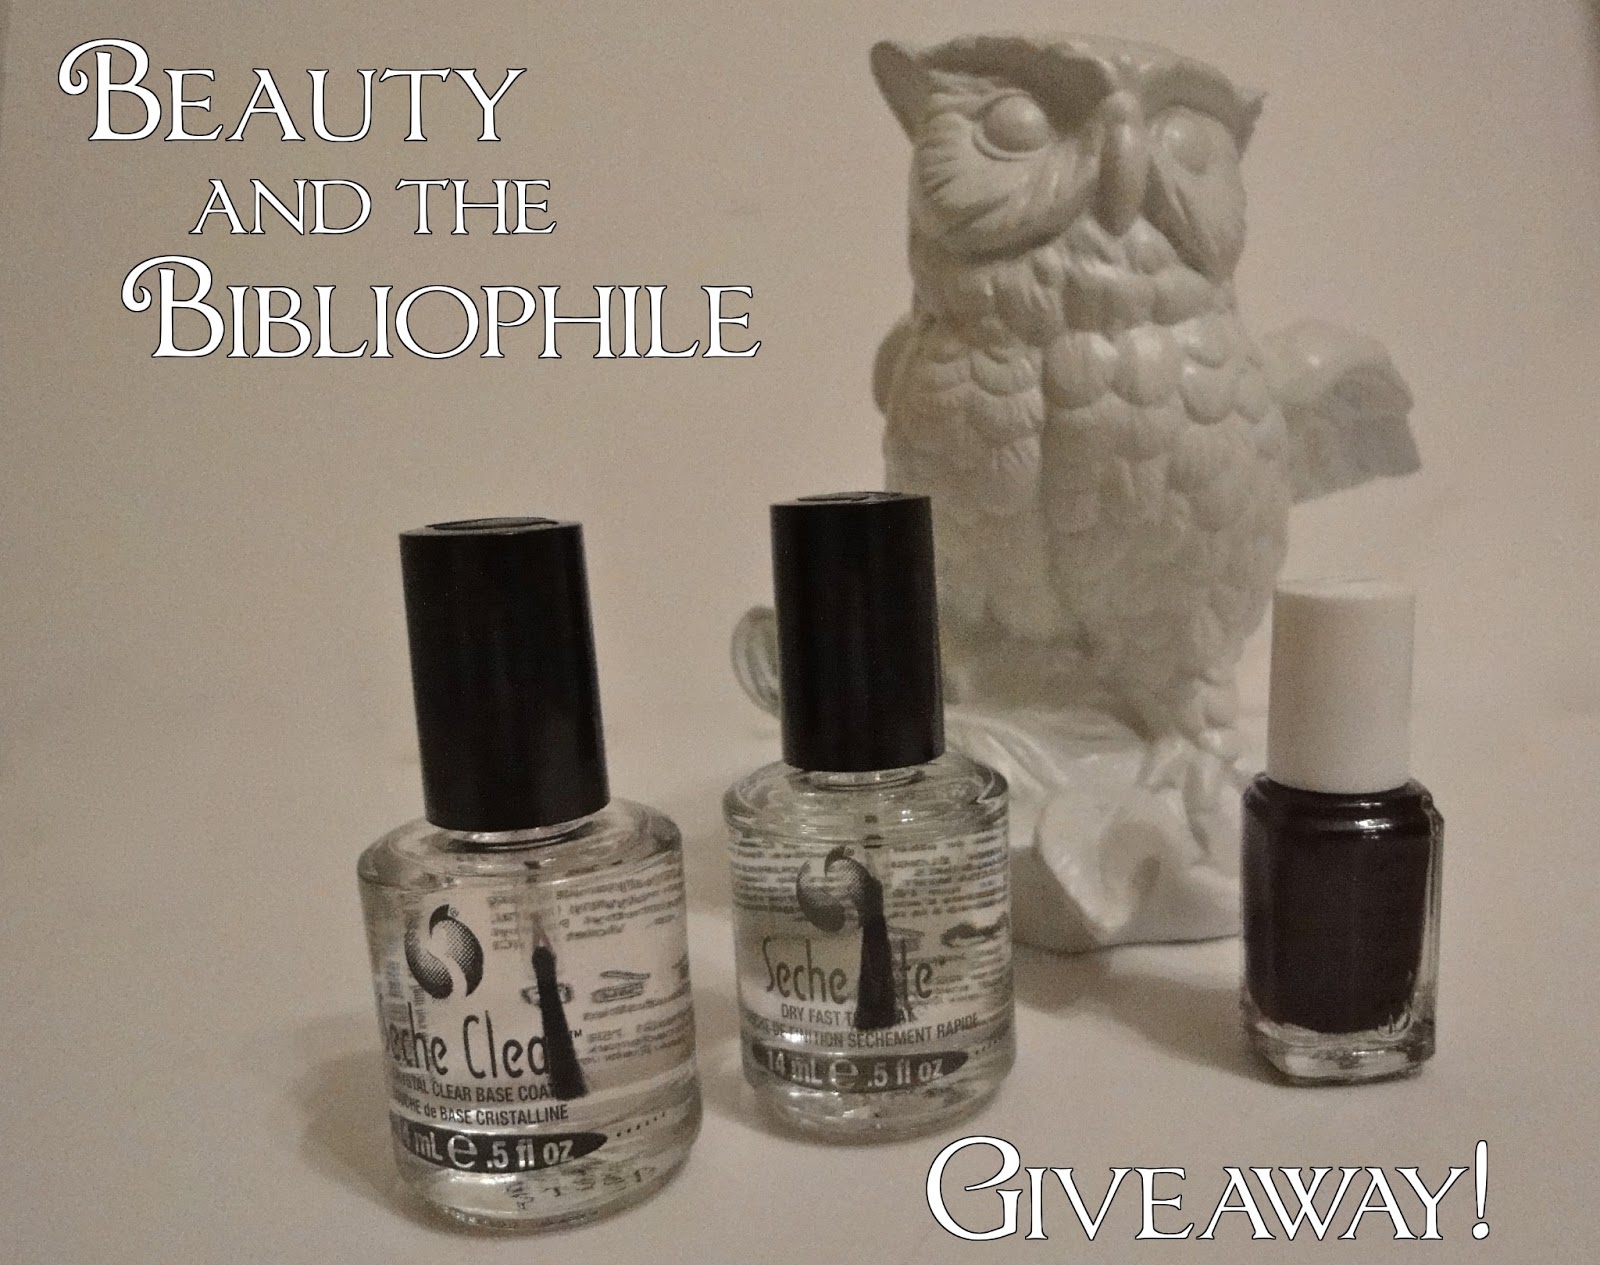 Beauty & the Bibliophile: First Ever Giveaway!